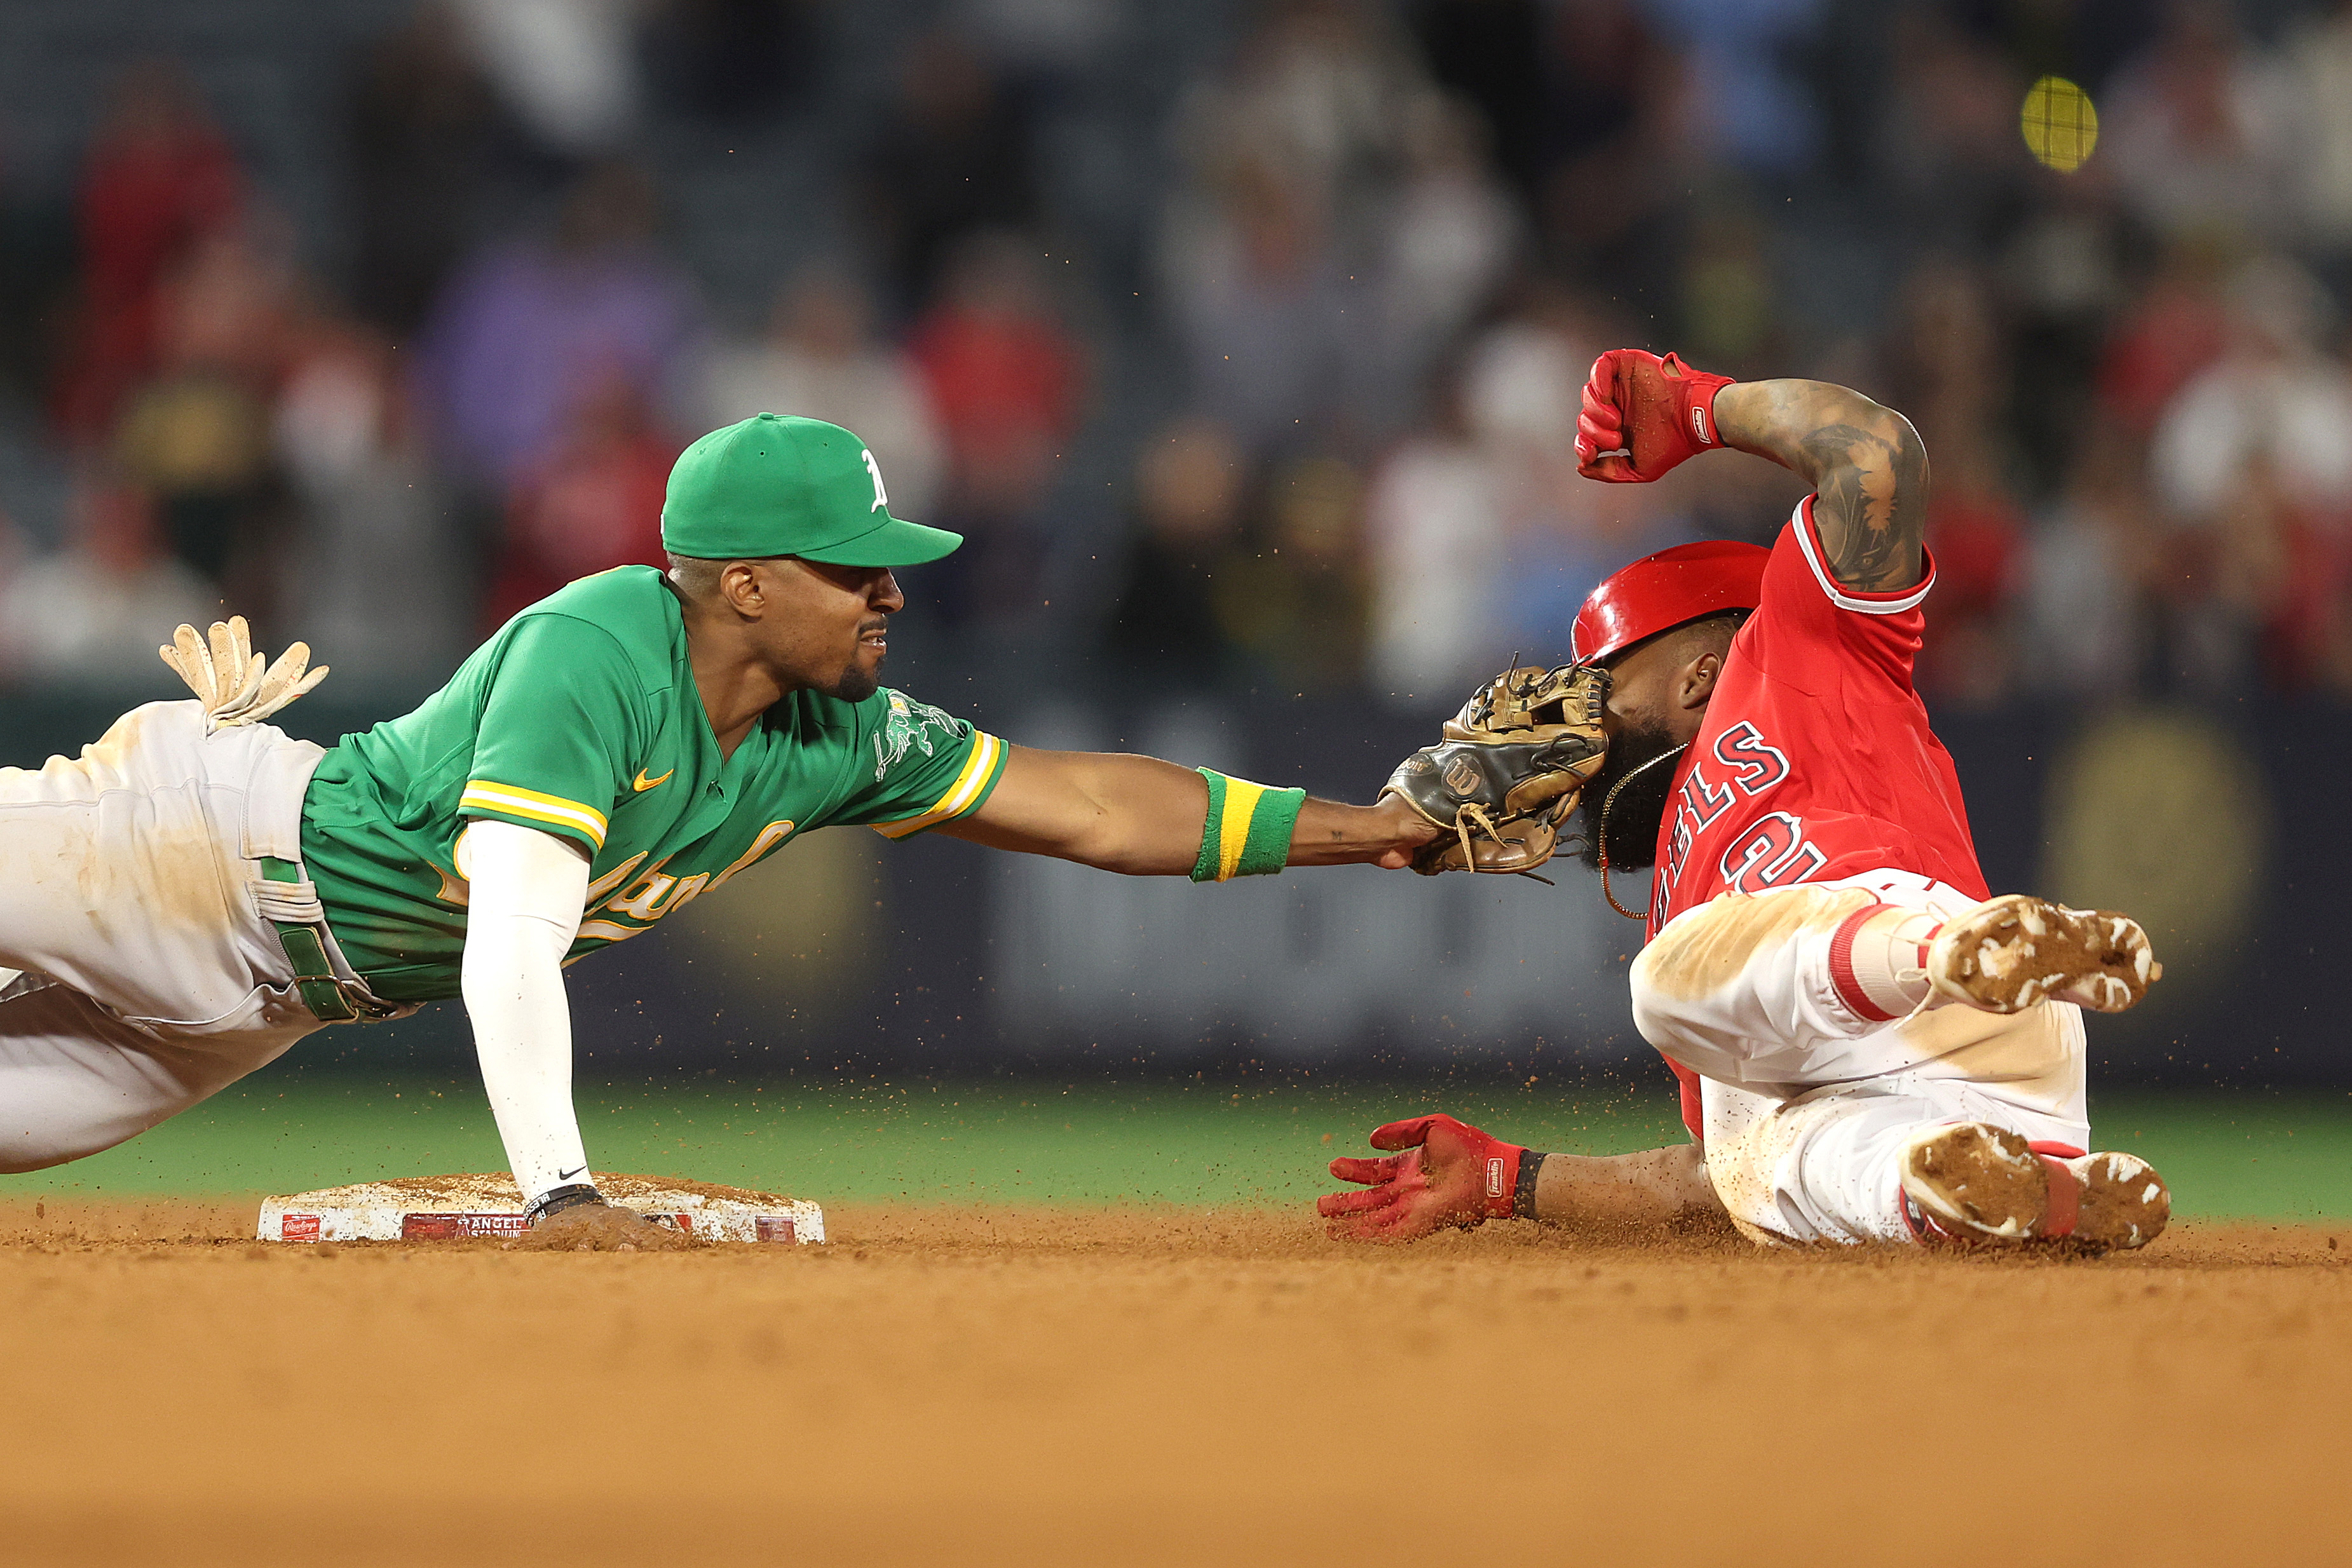 Tony Kemp #5 of the Oakland Athletics tags out Luis Rengifo #2 of the Los Angeles Angels at second base during the tenth inning at Angel Stadium of Anaheim on April 24, 2023 in Anaheim, California